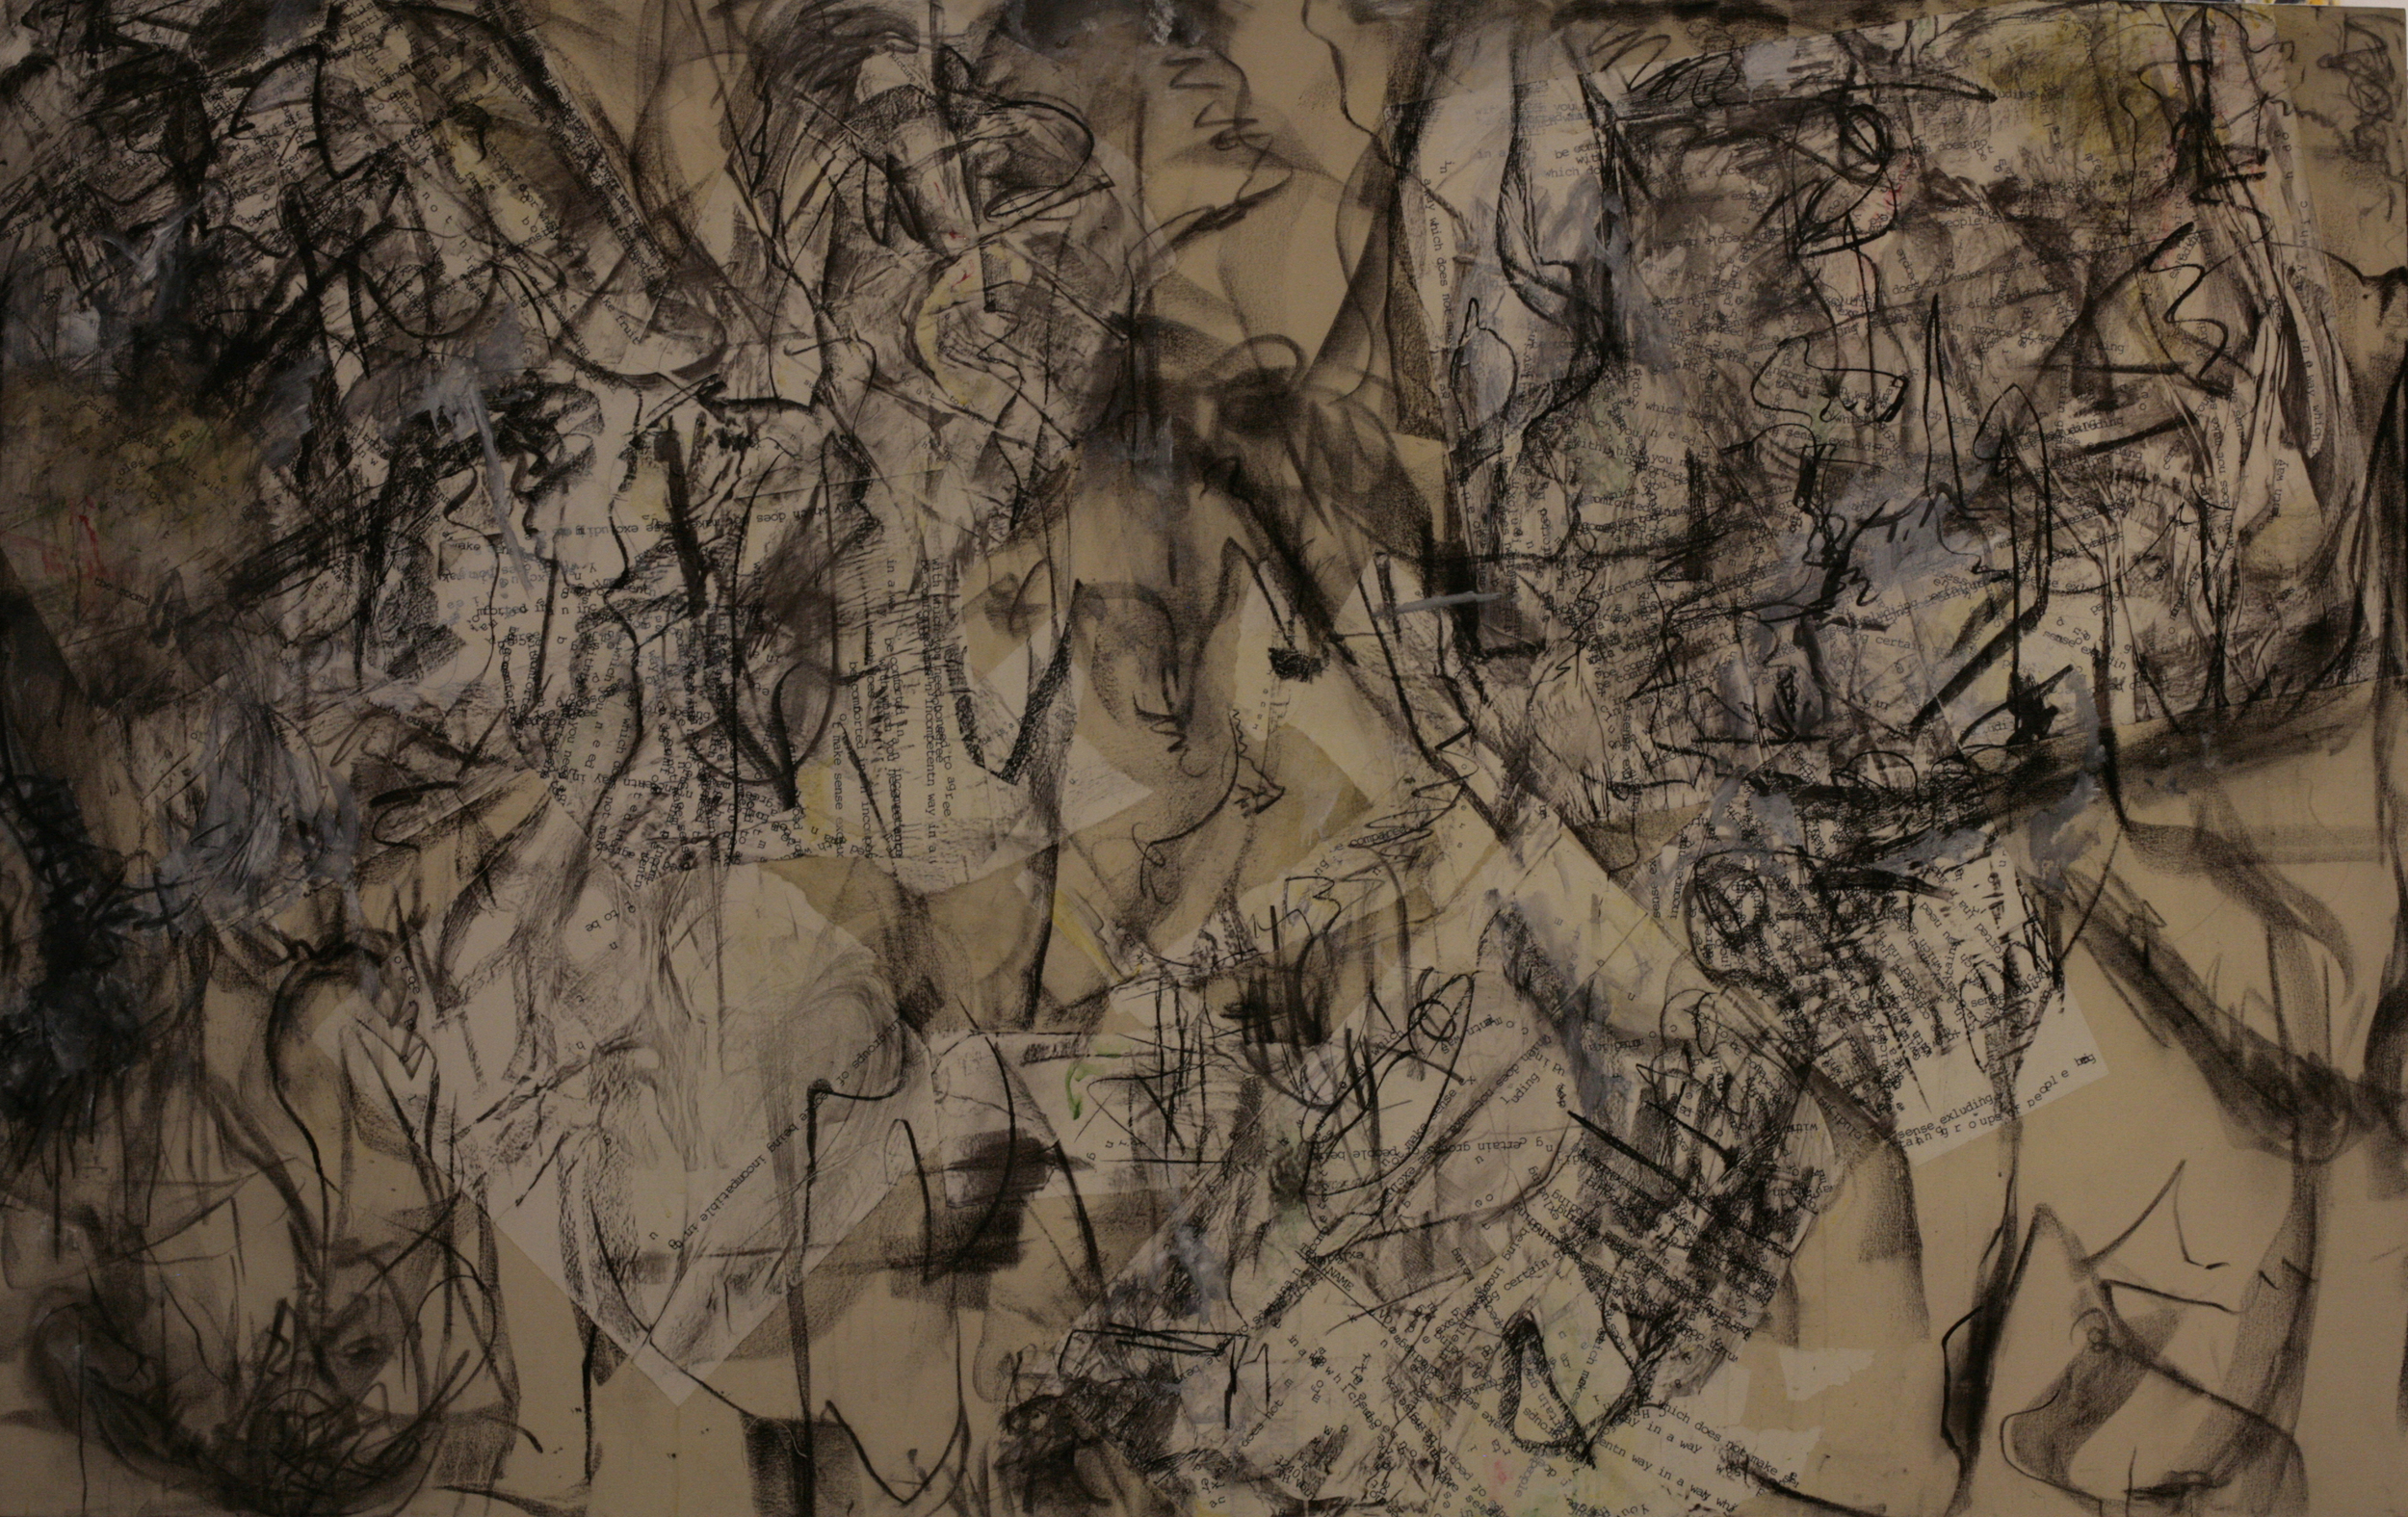 "Wordtree" #12, charcoal, type face, poetry collage, medium on canvas, 60"x96"